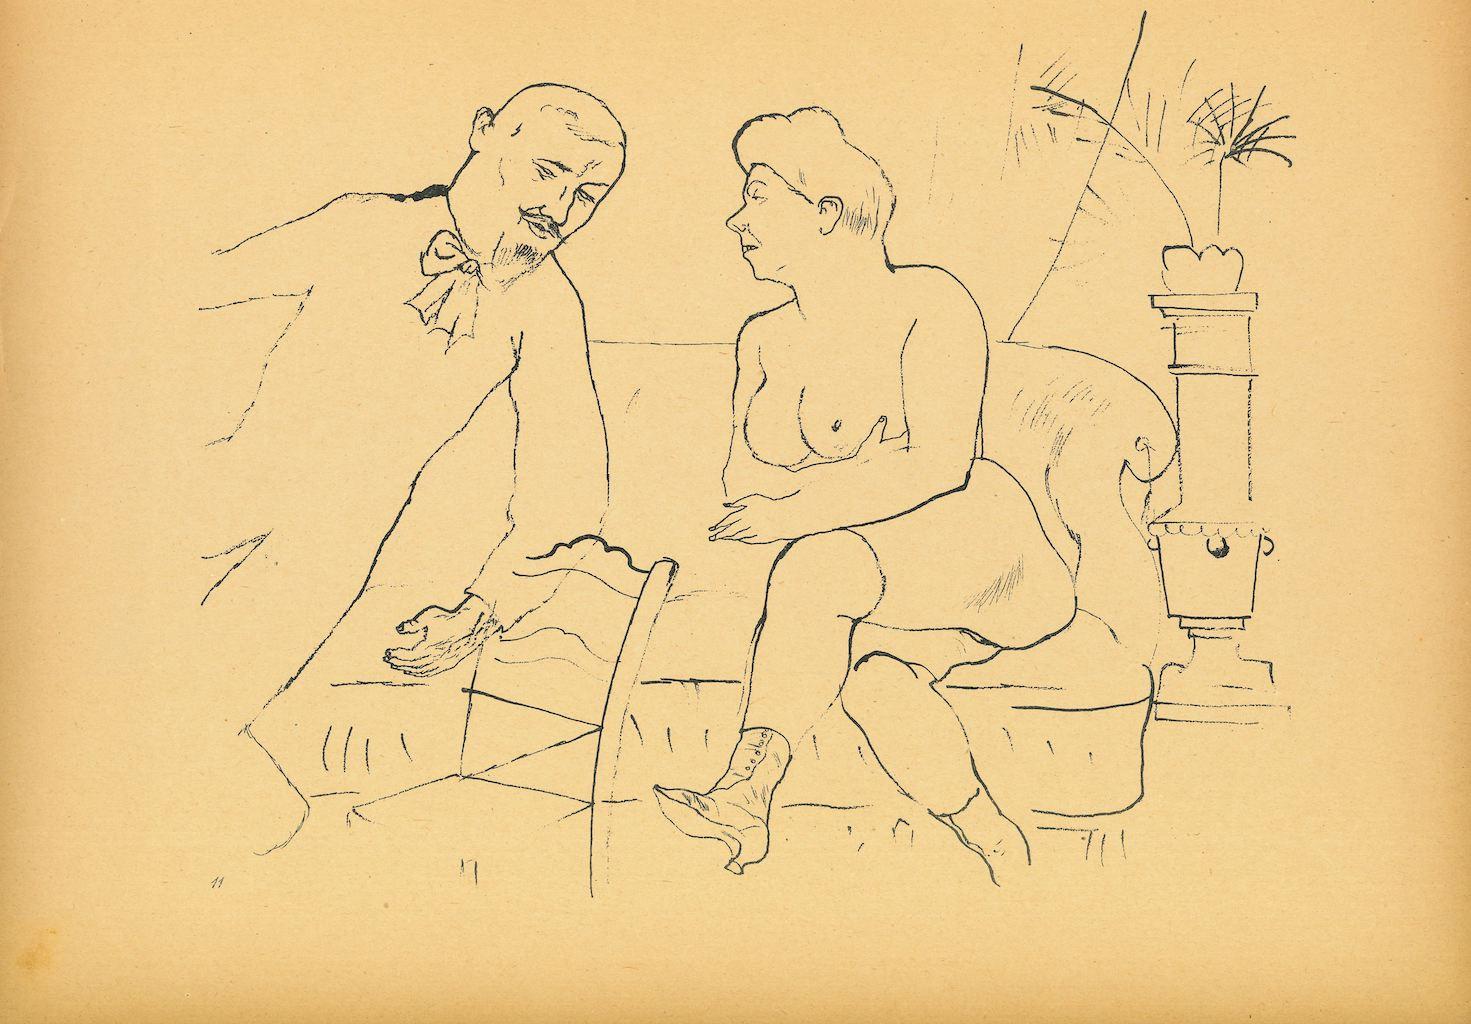 The Visit is an original offset and lithograph realized by George Grosz.

The artwork is the plate n. 11 from the portfolio Ecce Homo published between 1922/1923, edition of Der Malik-Verlag Berlin.

Original title: Der Besuch

Unsigned and